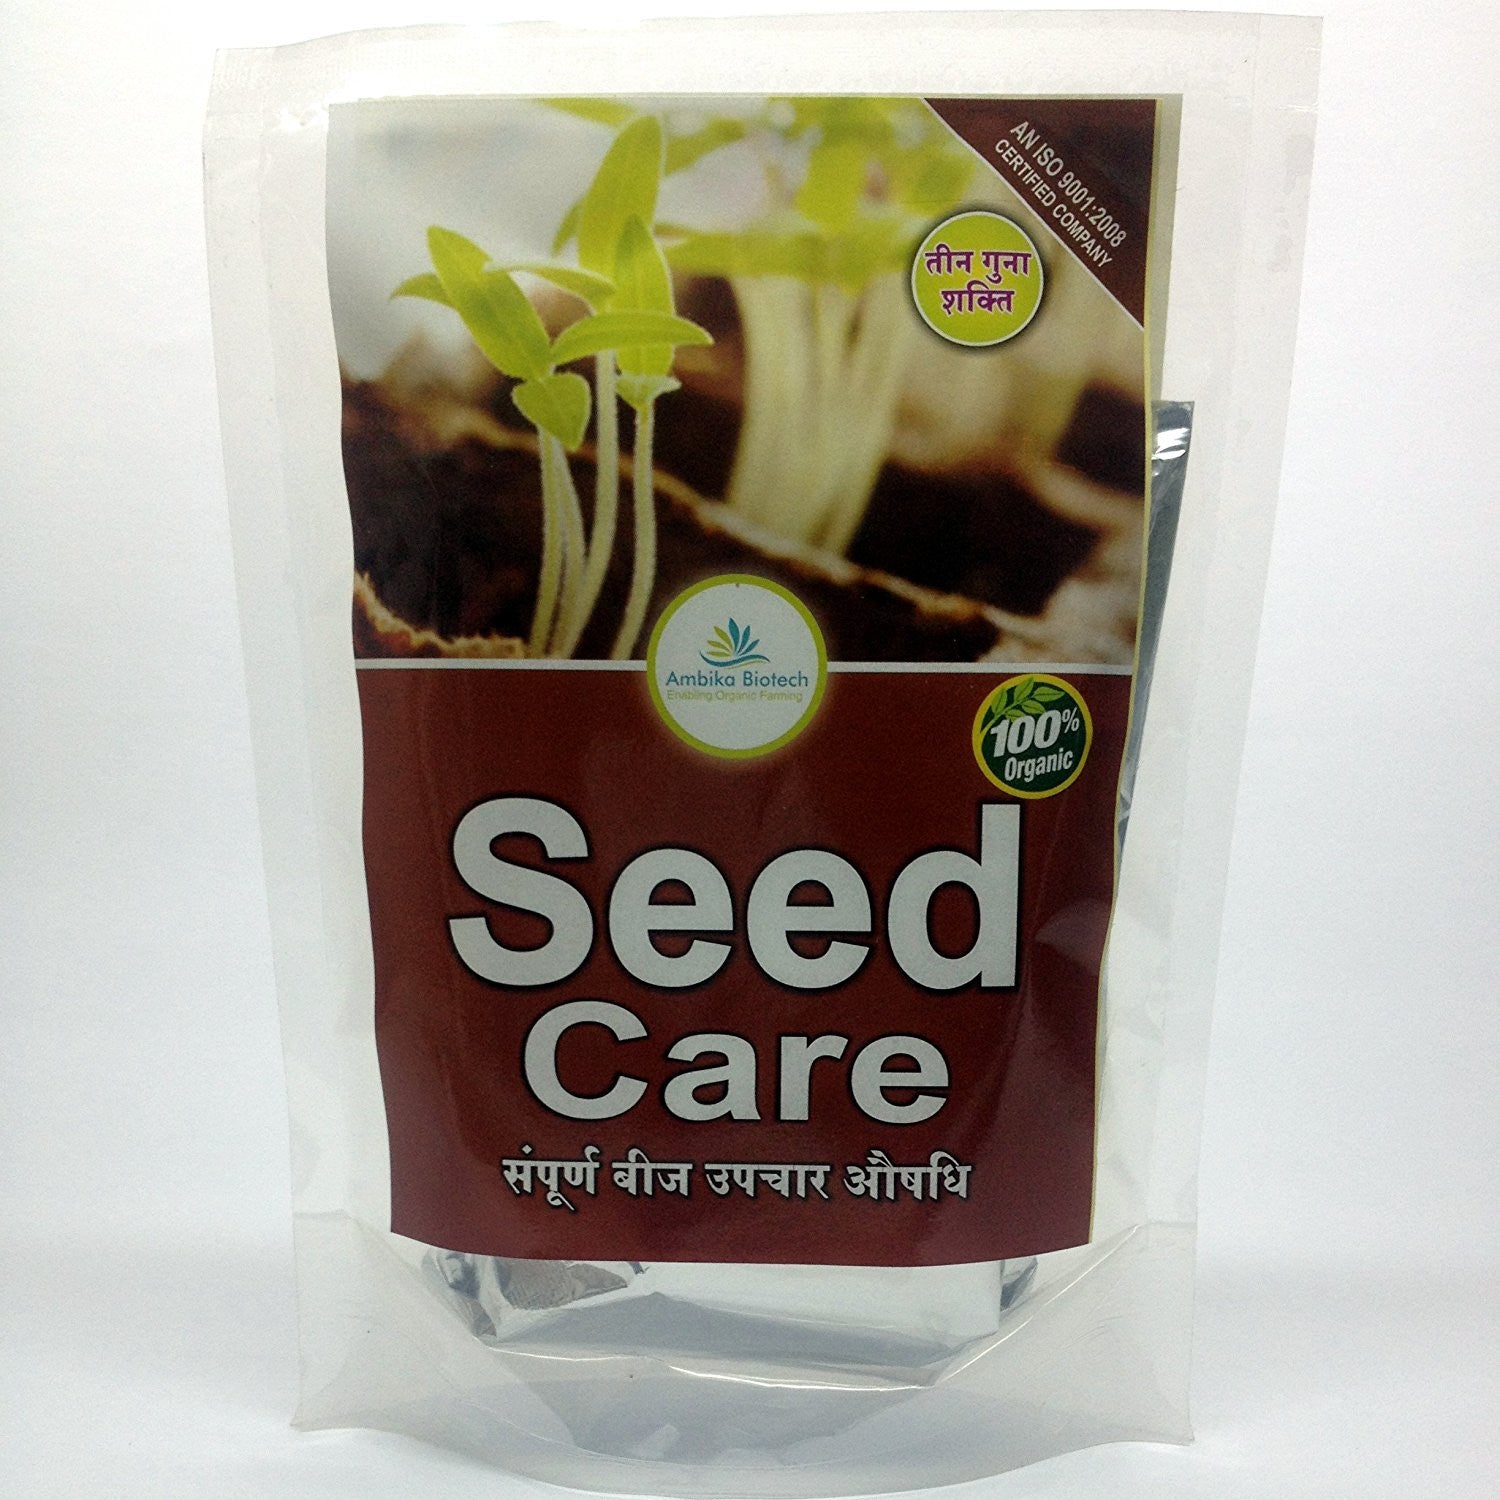 Seed Care, Complete Seed Treatment Before Sowing, Increases Germination, Stronger Seedlings 200gm - Casa De Amor Organic Gardening India